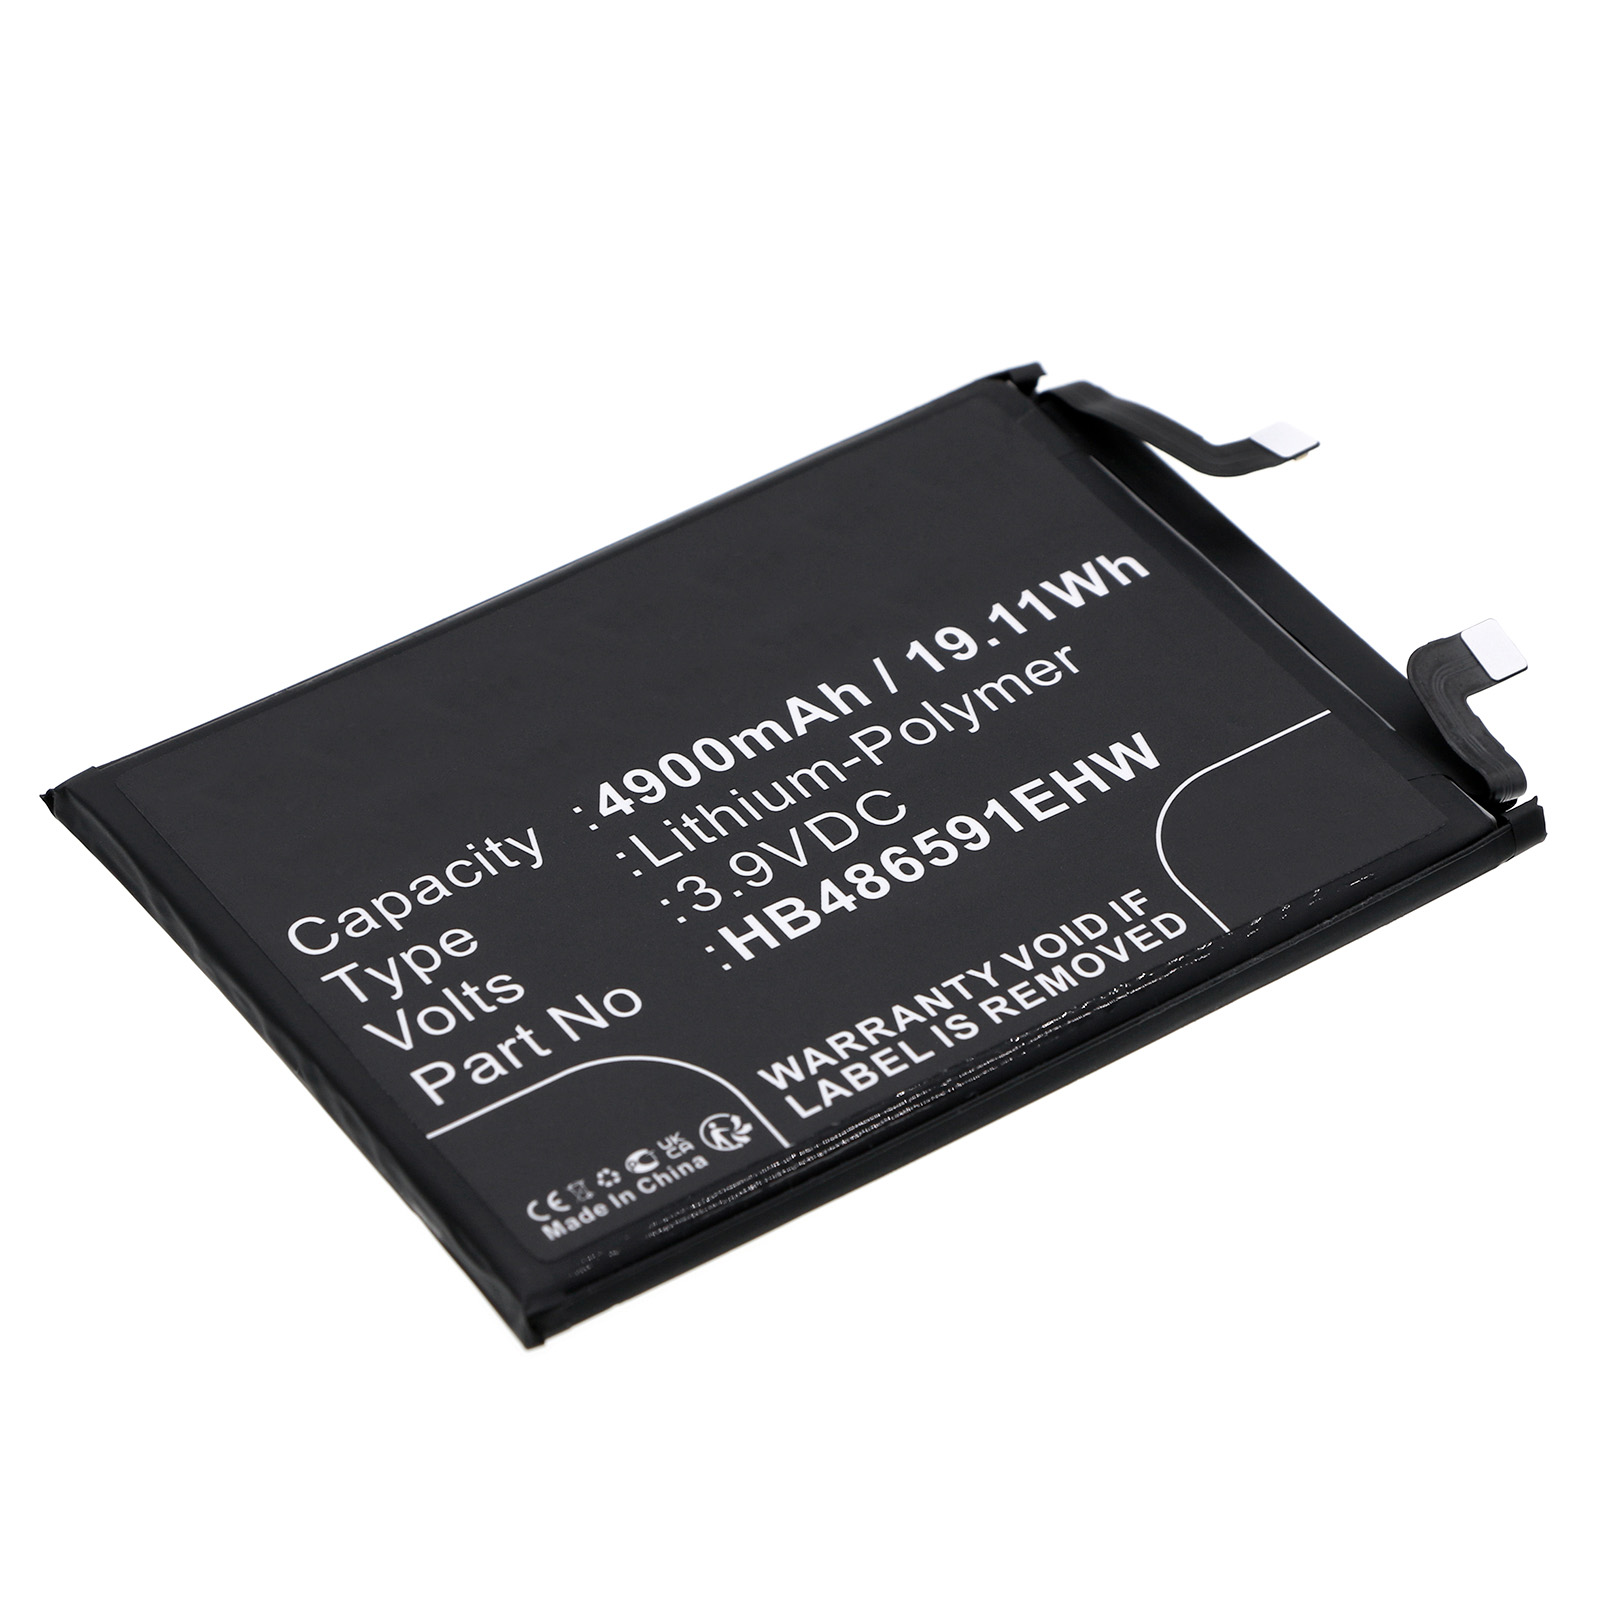 Synergy Digital Cell Phone Battery, Compatible with Honor HB486591EHW Cell Phone Battery (Li-Pol, 3.9V, 4900mAh)